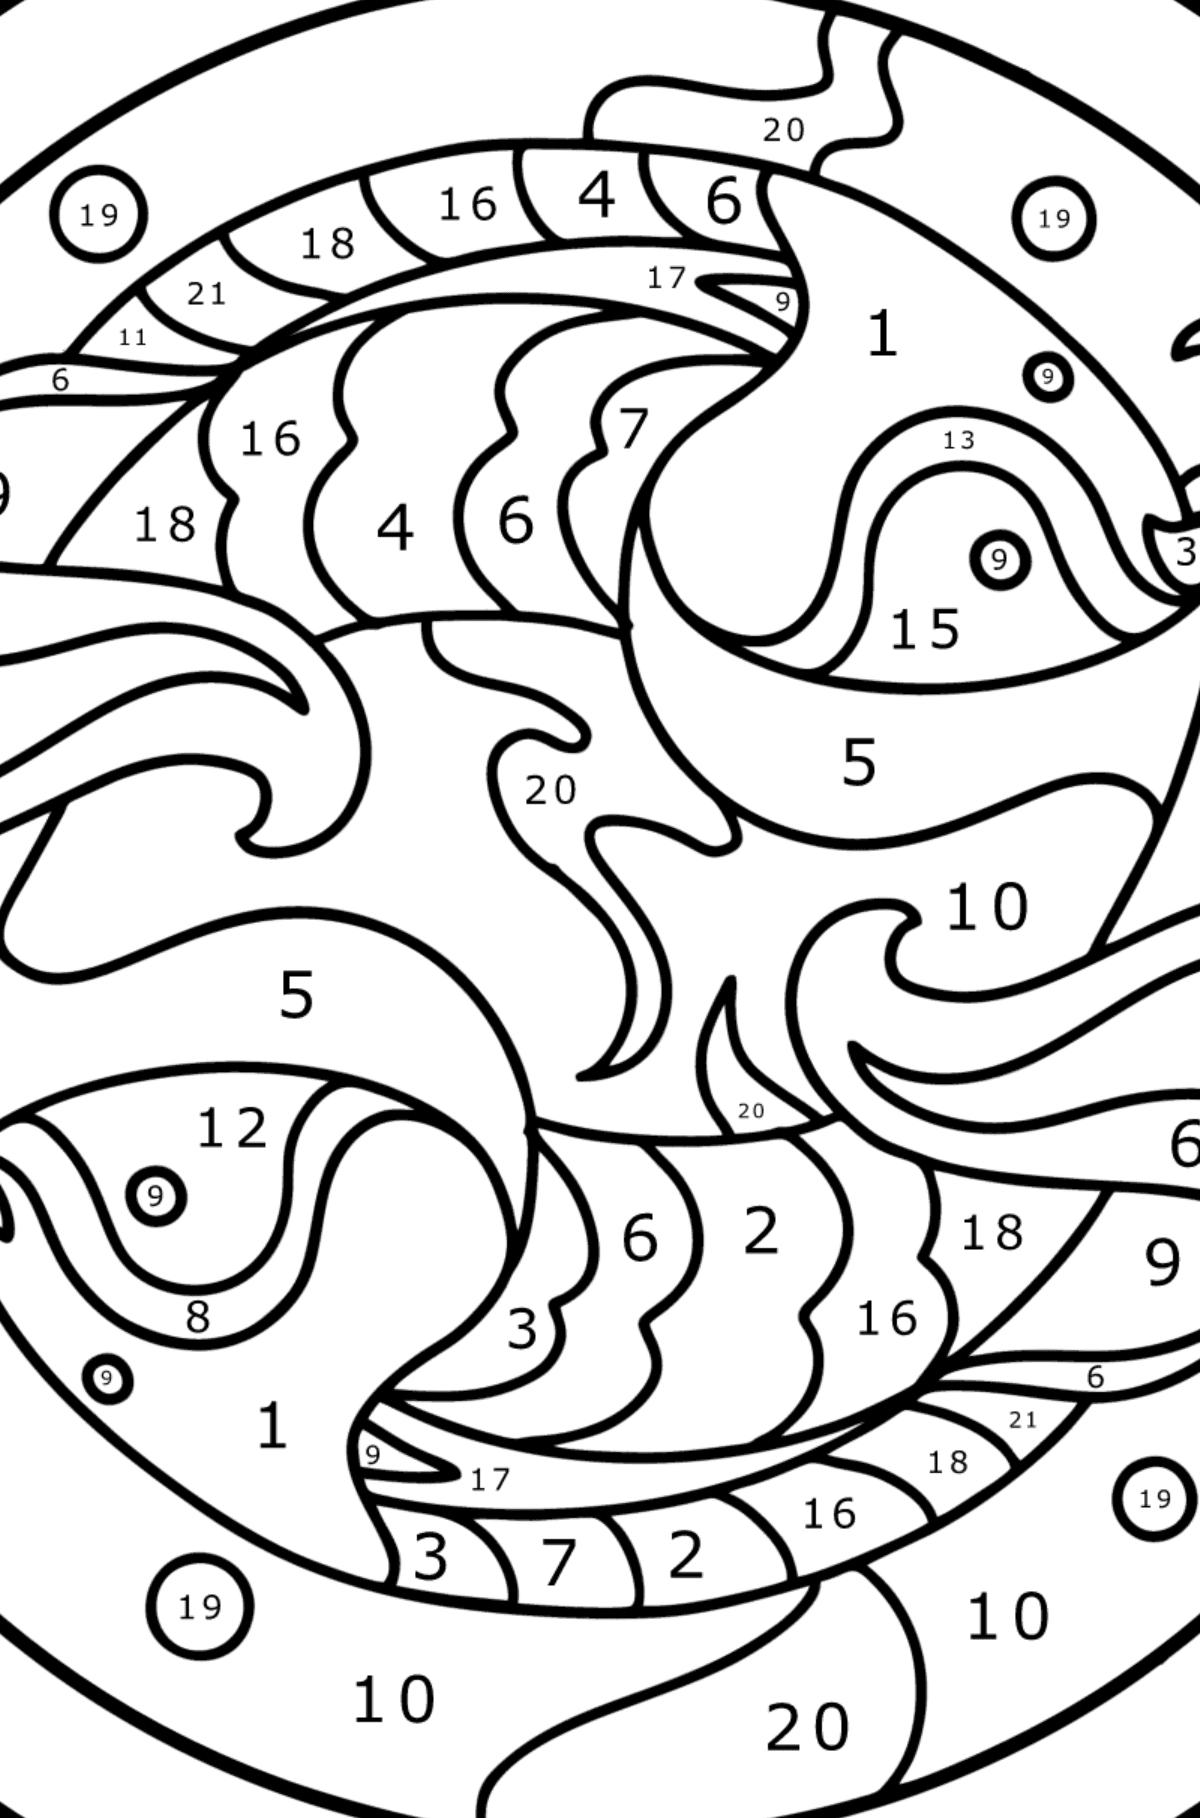 Coloring page for kids - zodiac sign Pisces - Coloring by Numbers for Kids